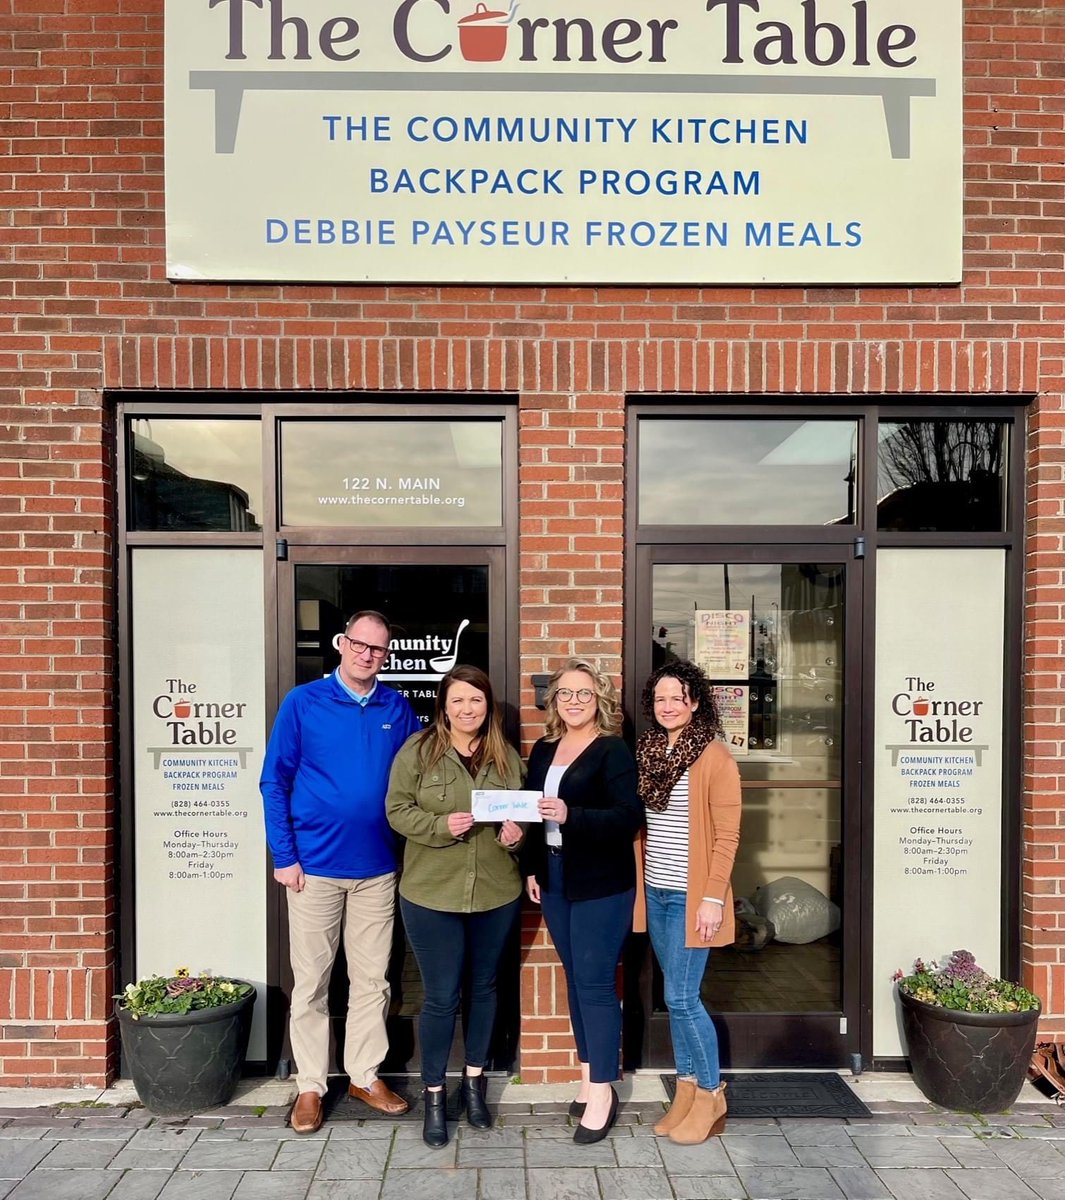 Thank you to The Corner Table whose mission is to provide meals with compassion, respect, and dignity to those in our community affected by hunger. . . #FeedingCommunity #NeighborsInNeed #SupportLocal